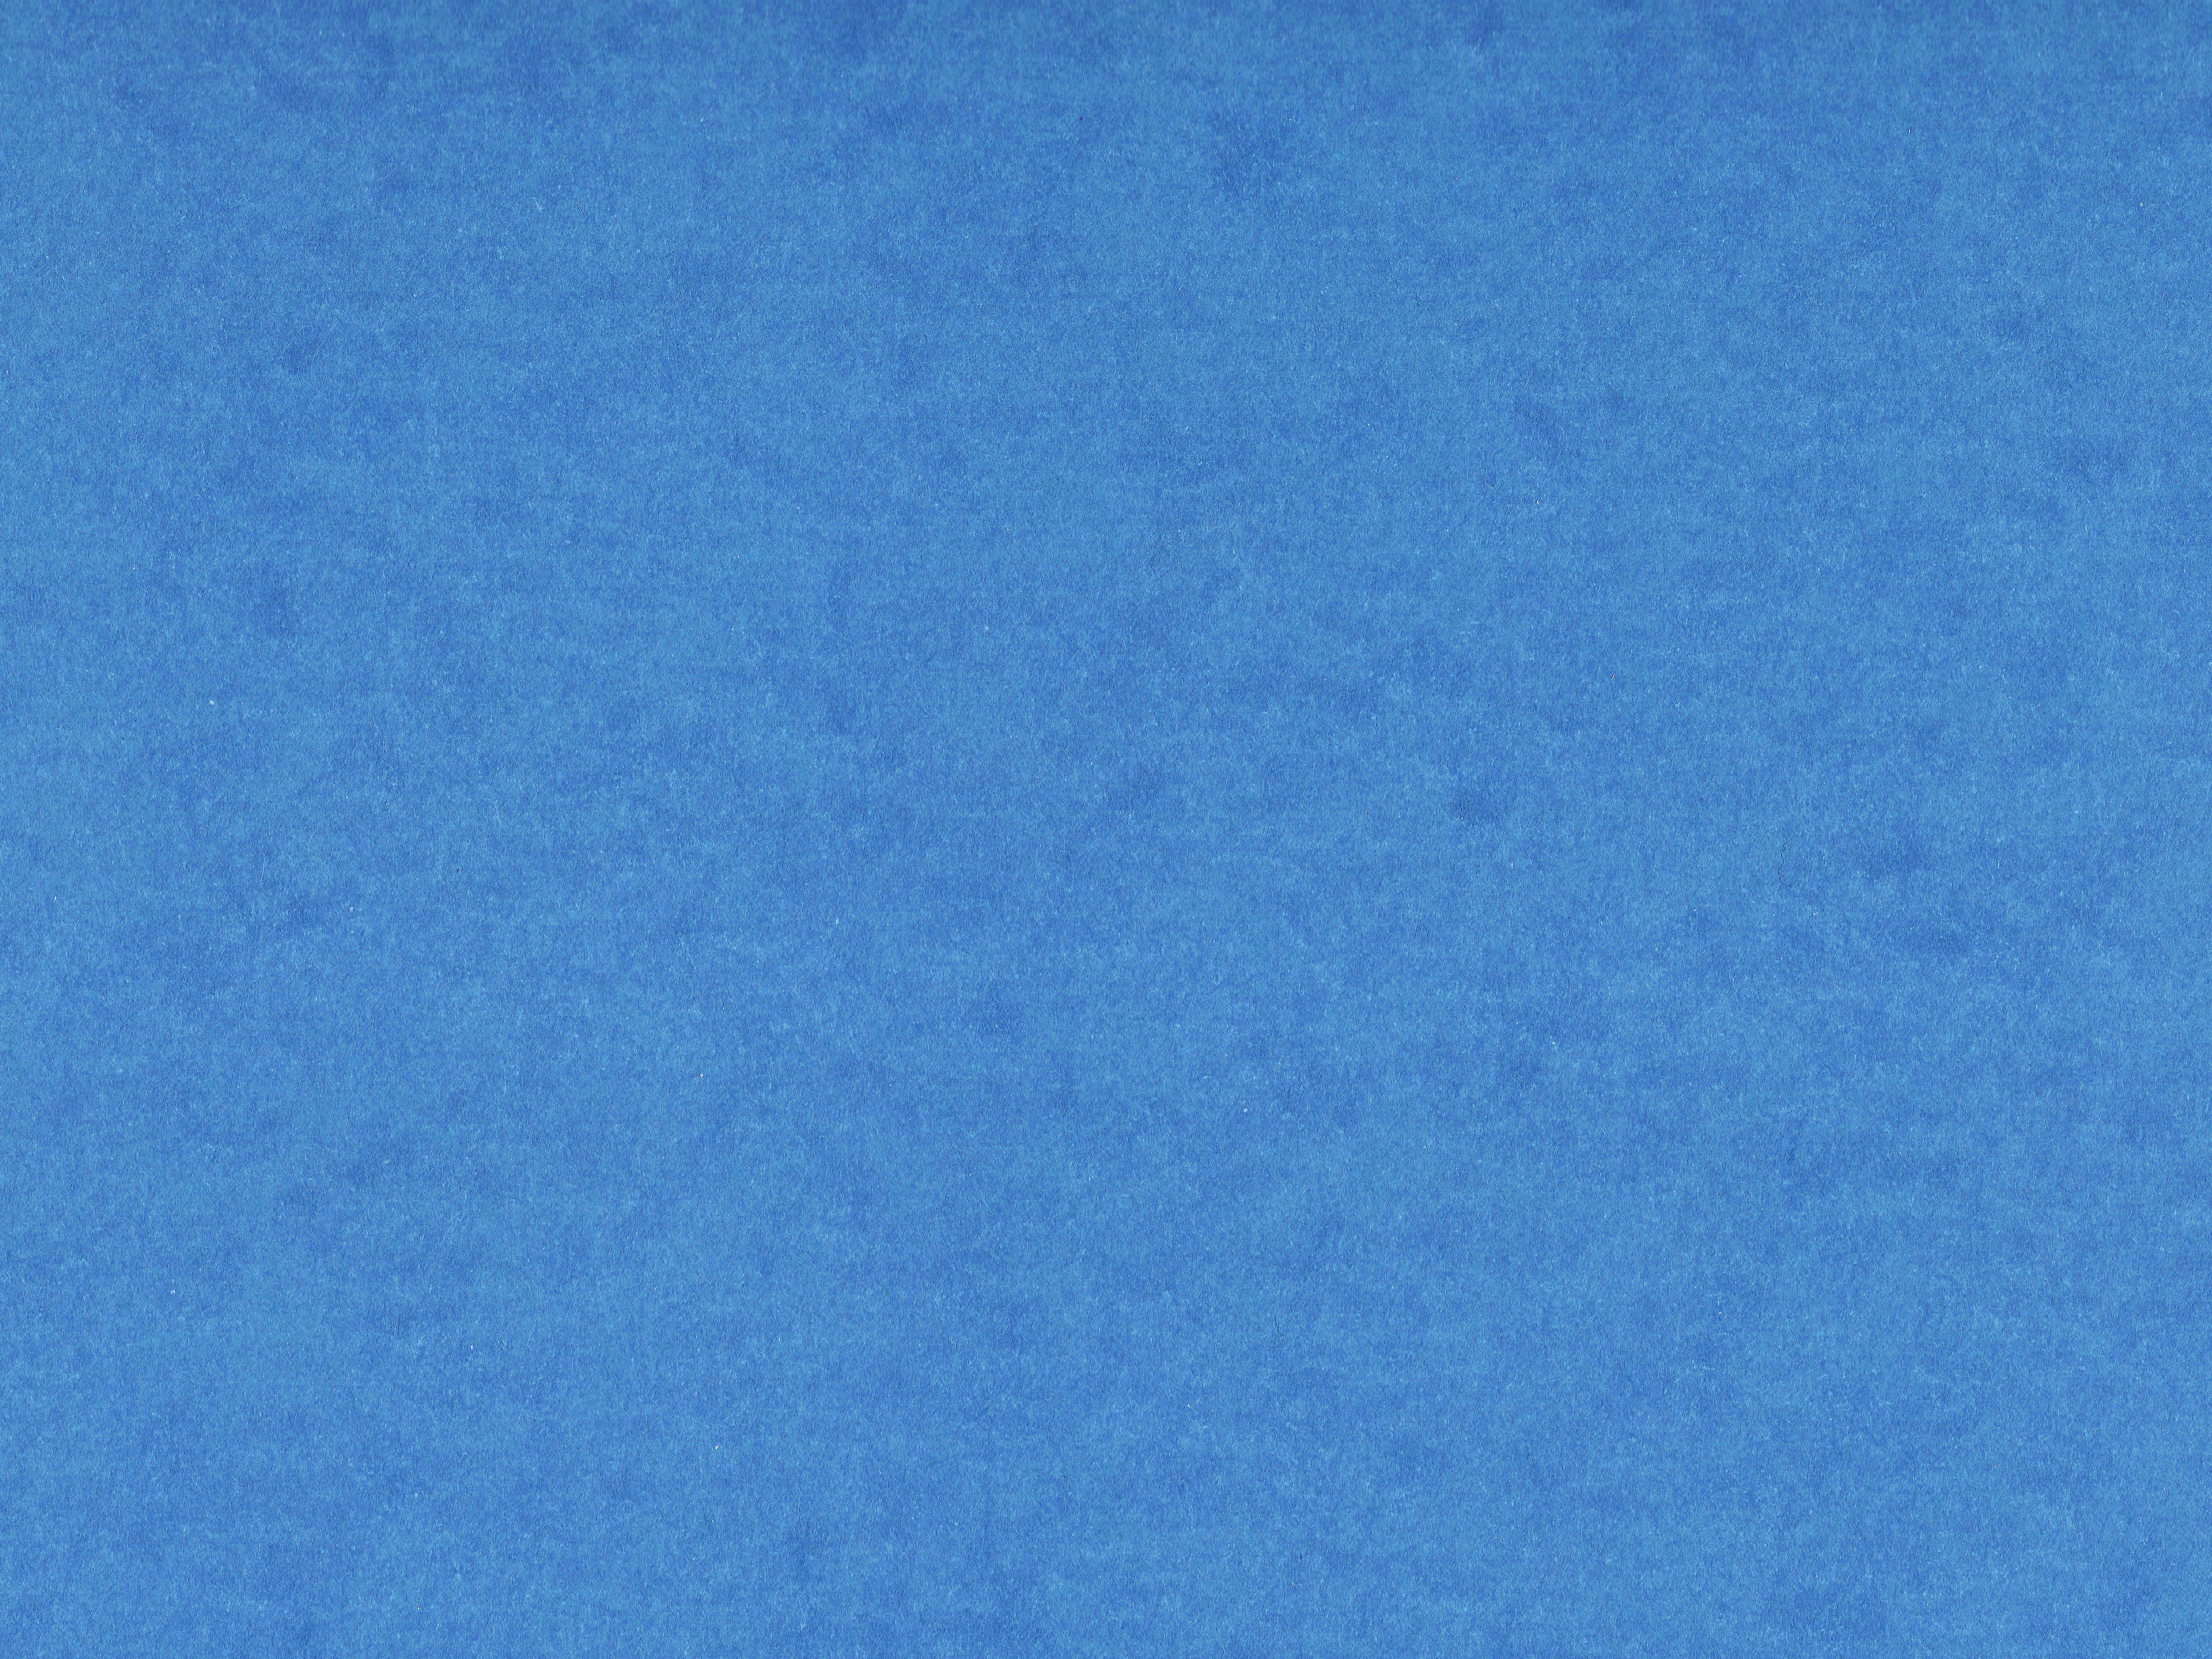 Light Blue Card Stock Paper Texture - Free High Resolution Photo.